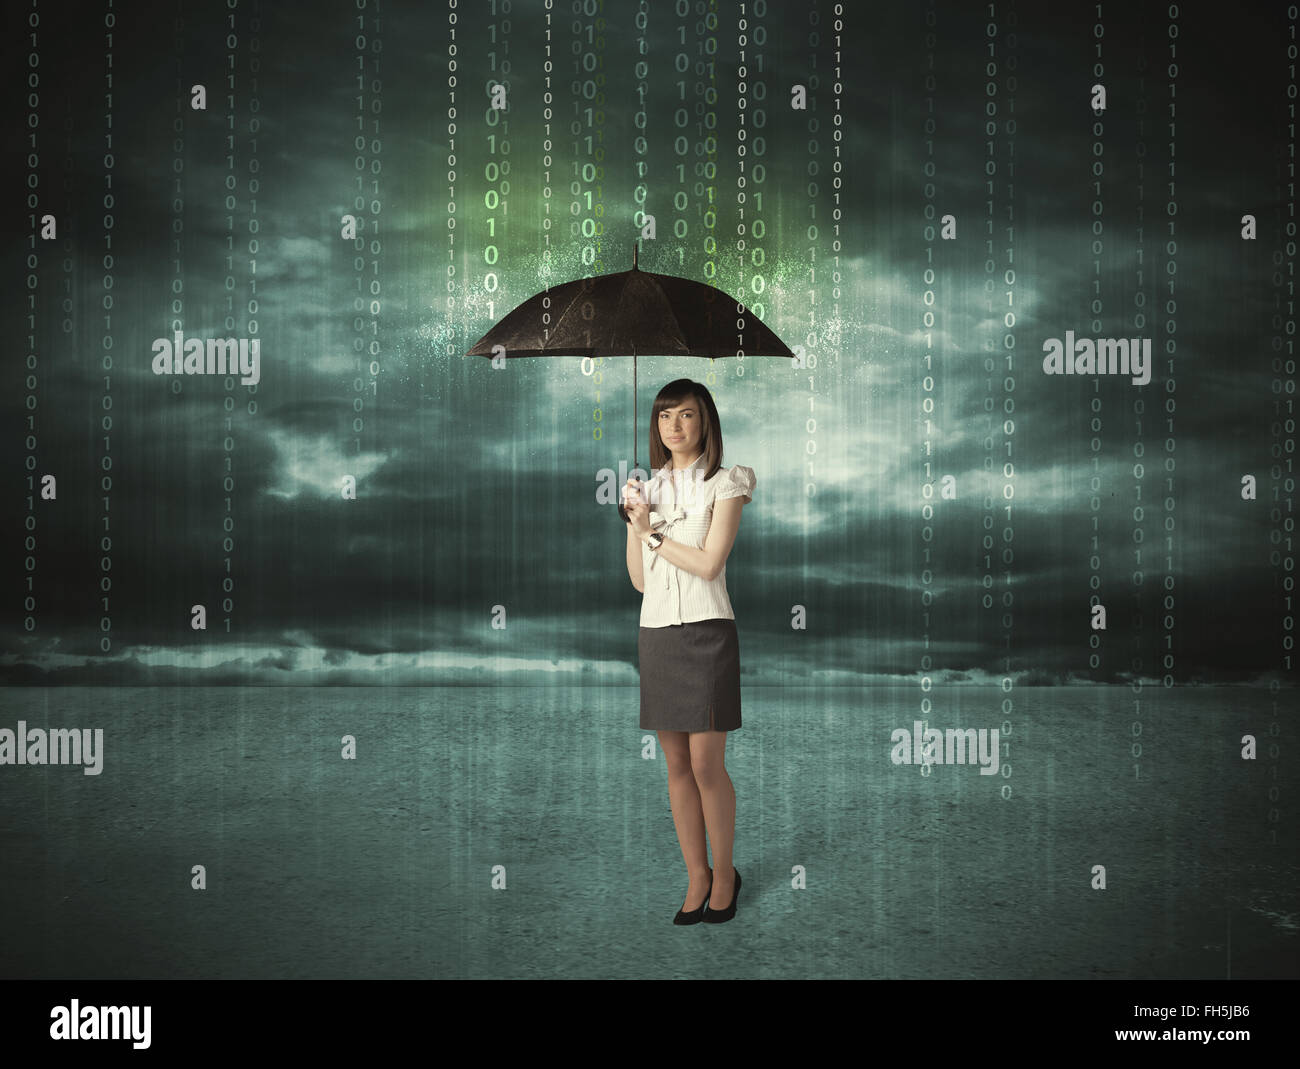 Business woman standing with umbrella data protection concept Stock Photo